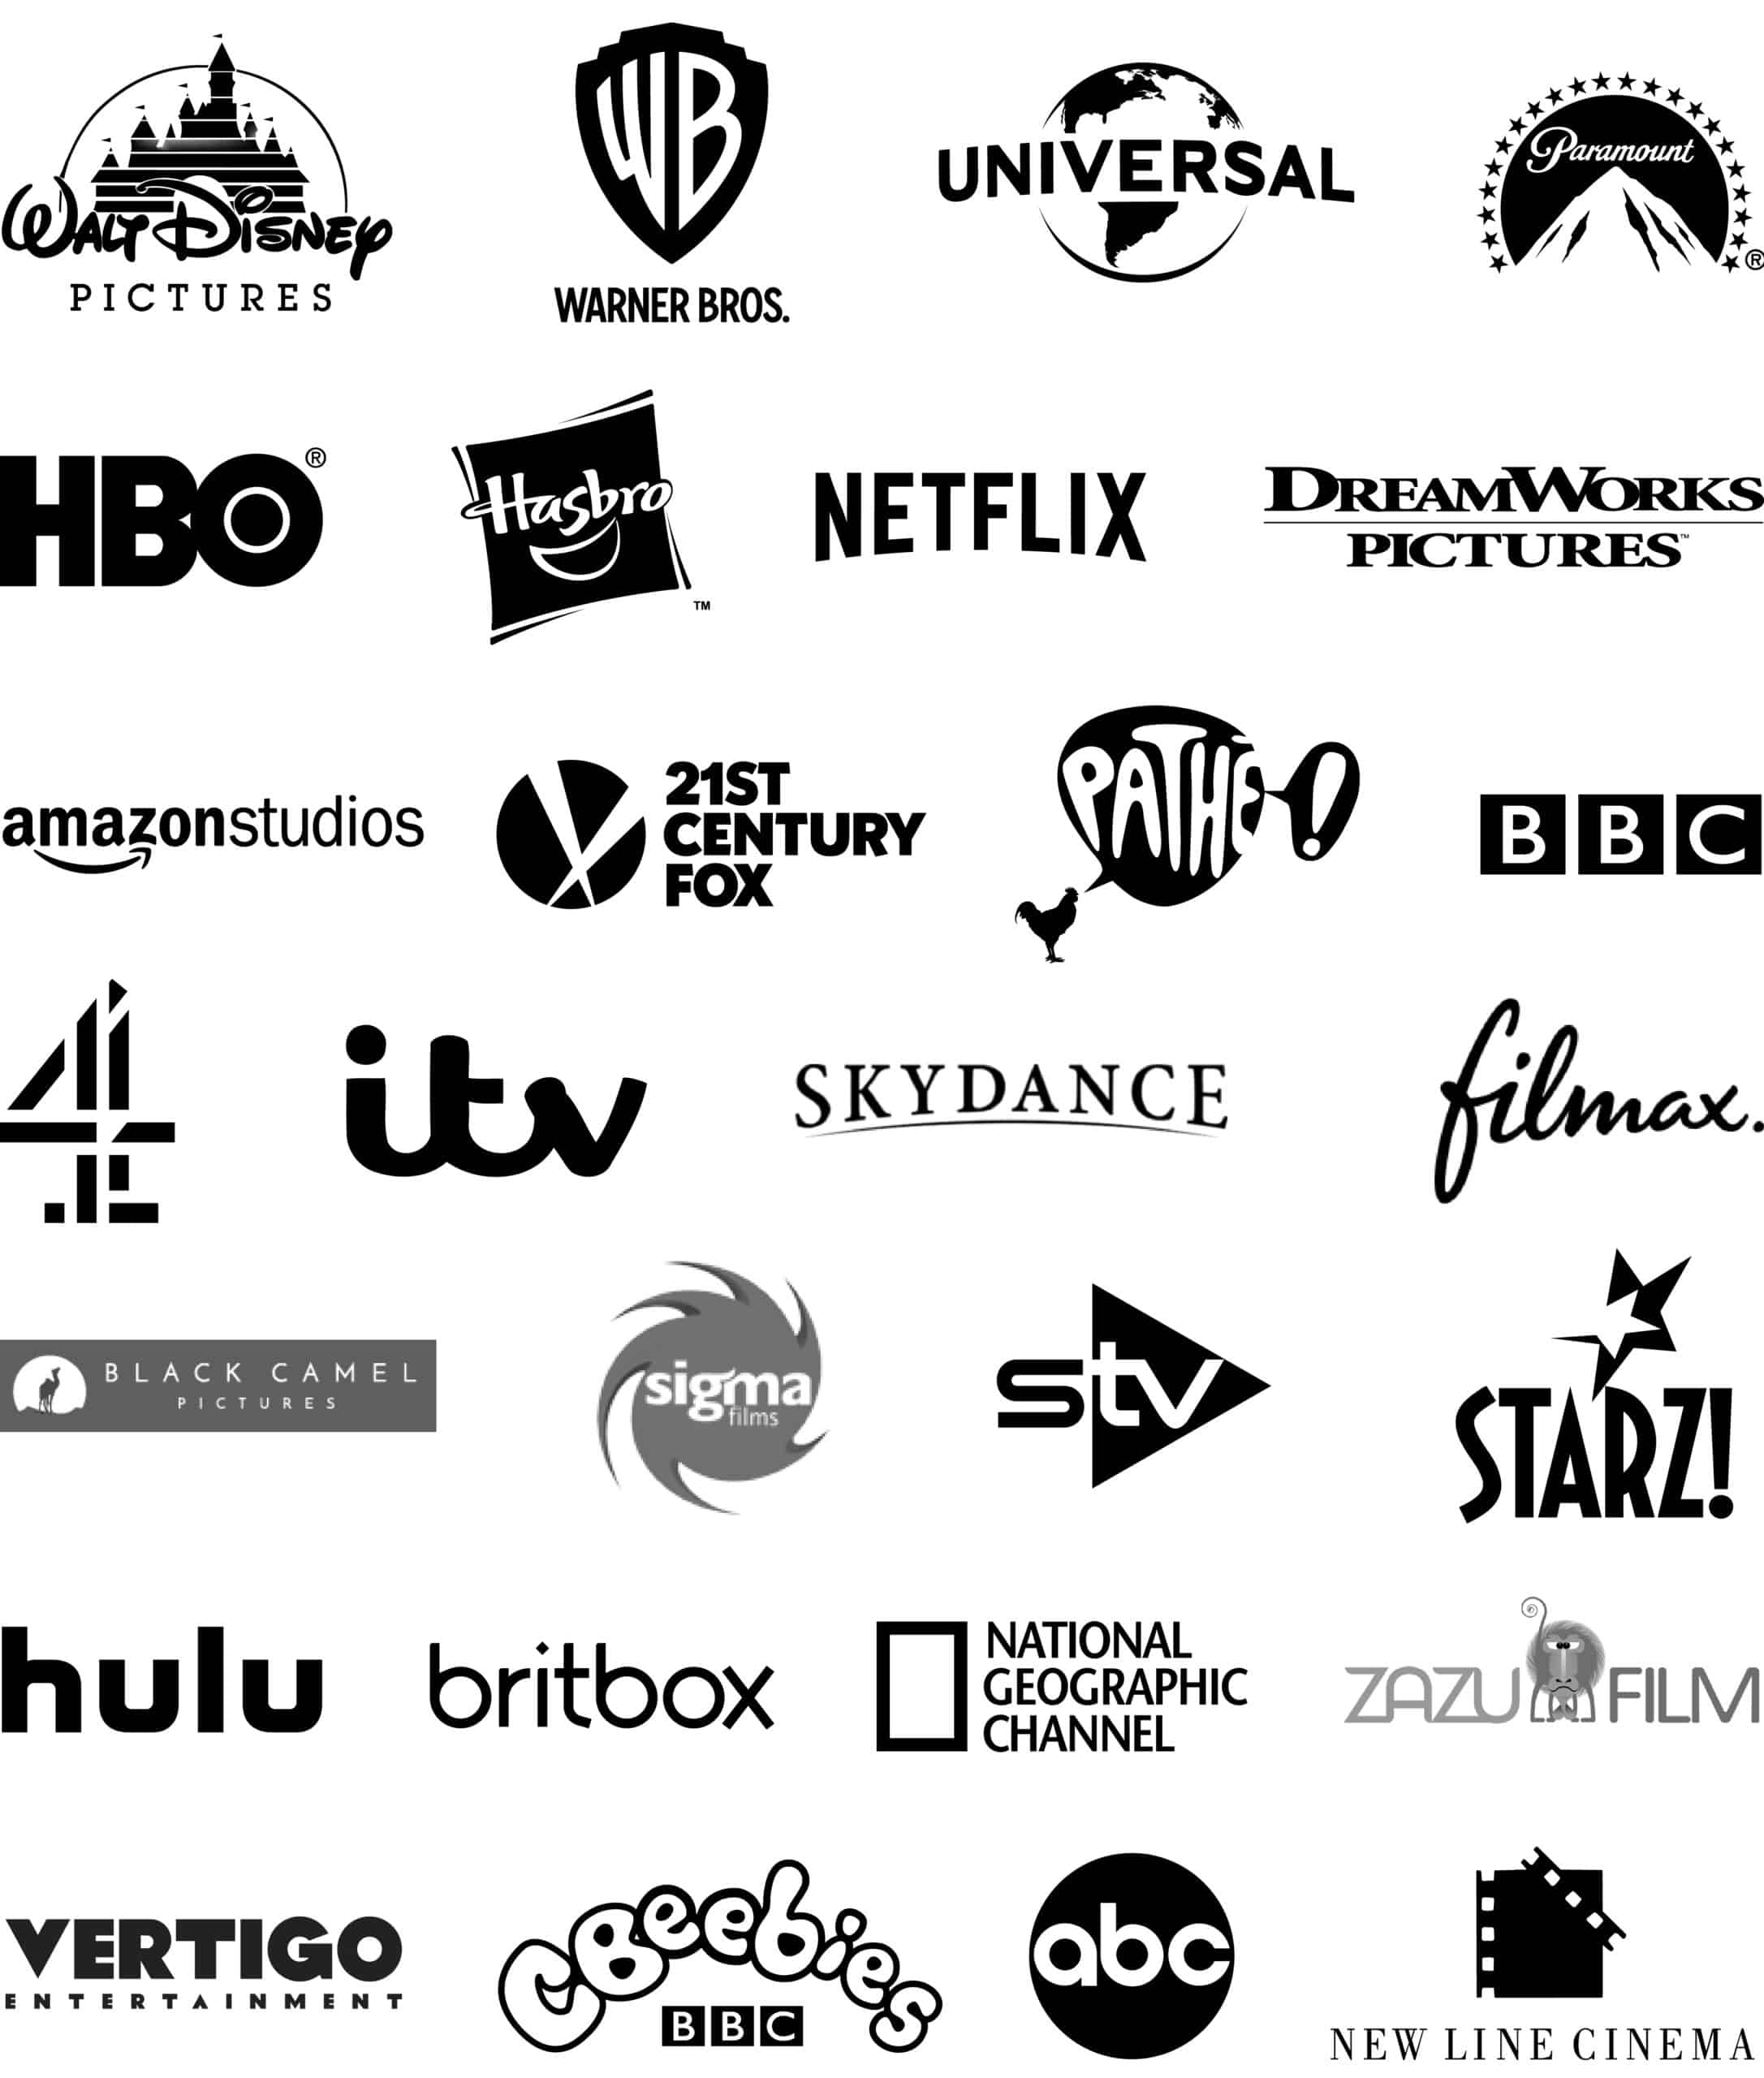 Inter Partner Logos of production companies and film studios